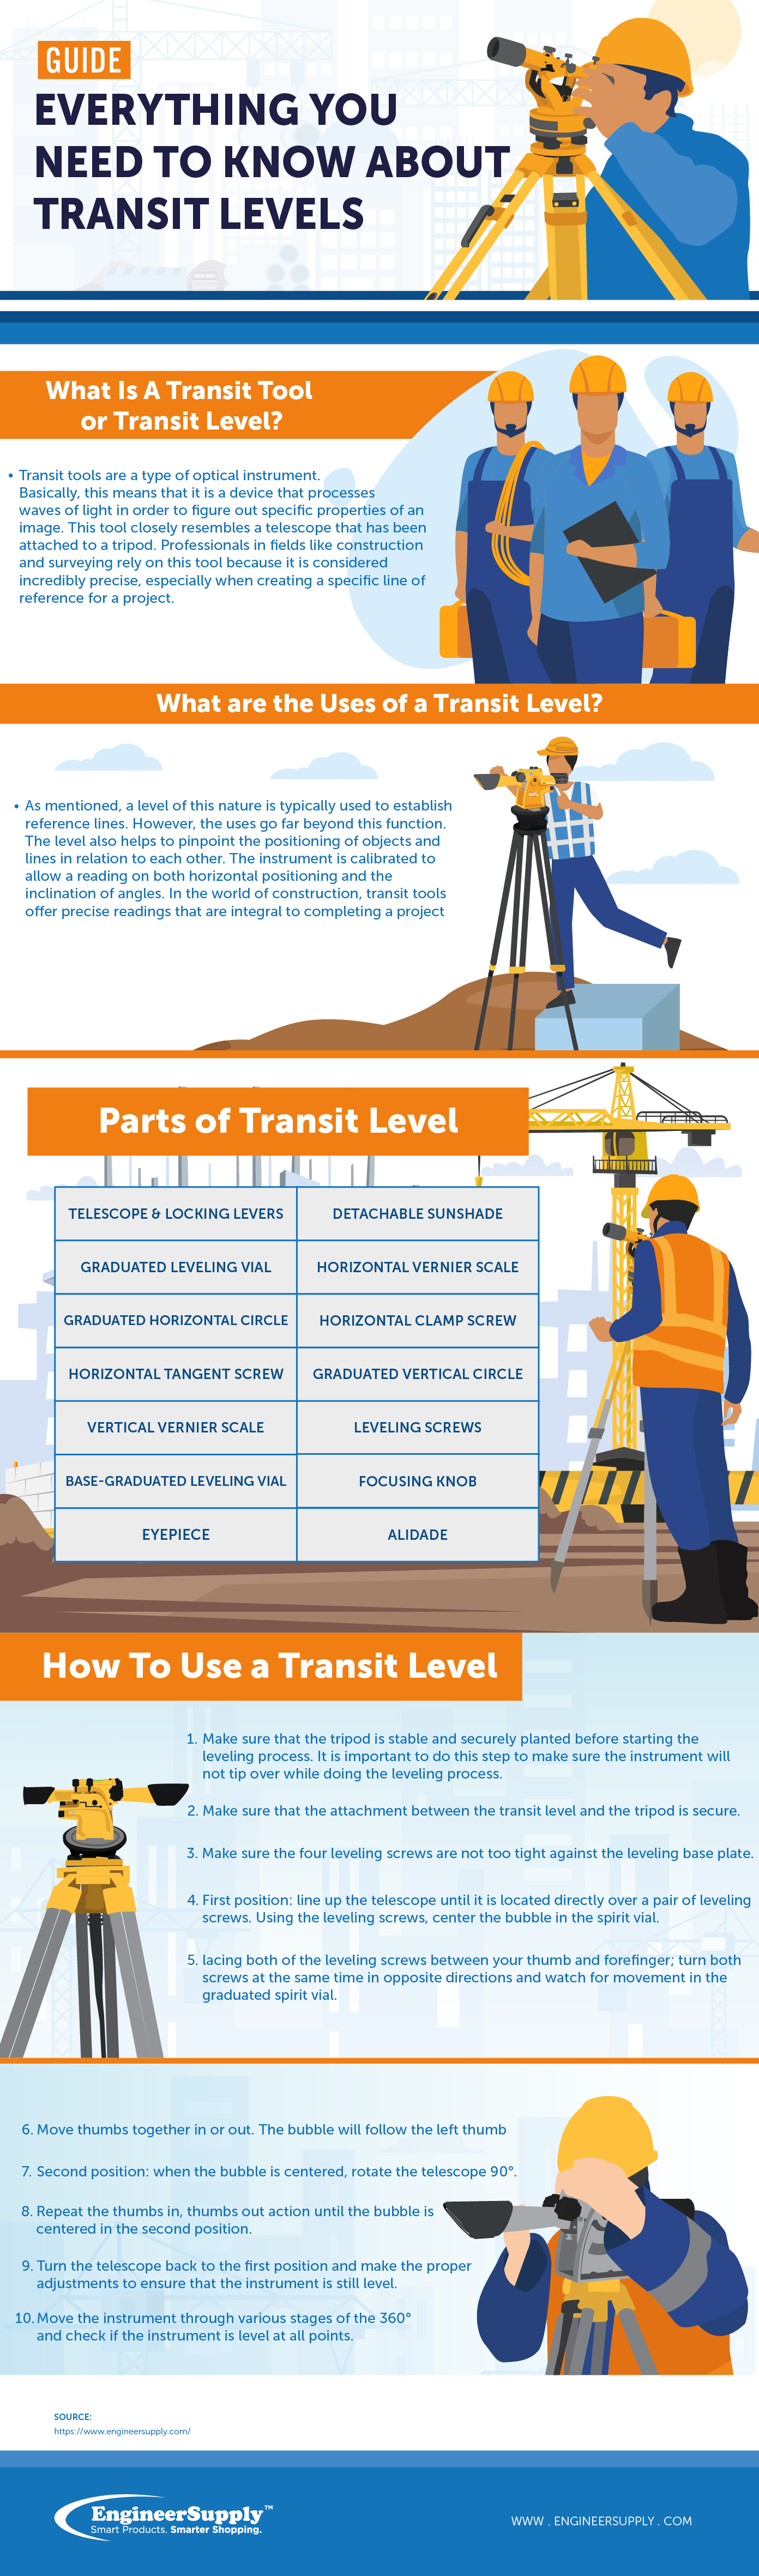 Infographics-Everything-You-Need-to-Know-About-Transit-Levels